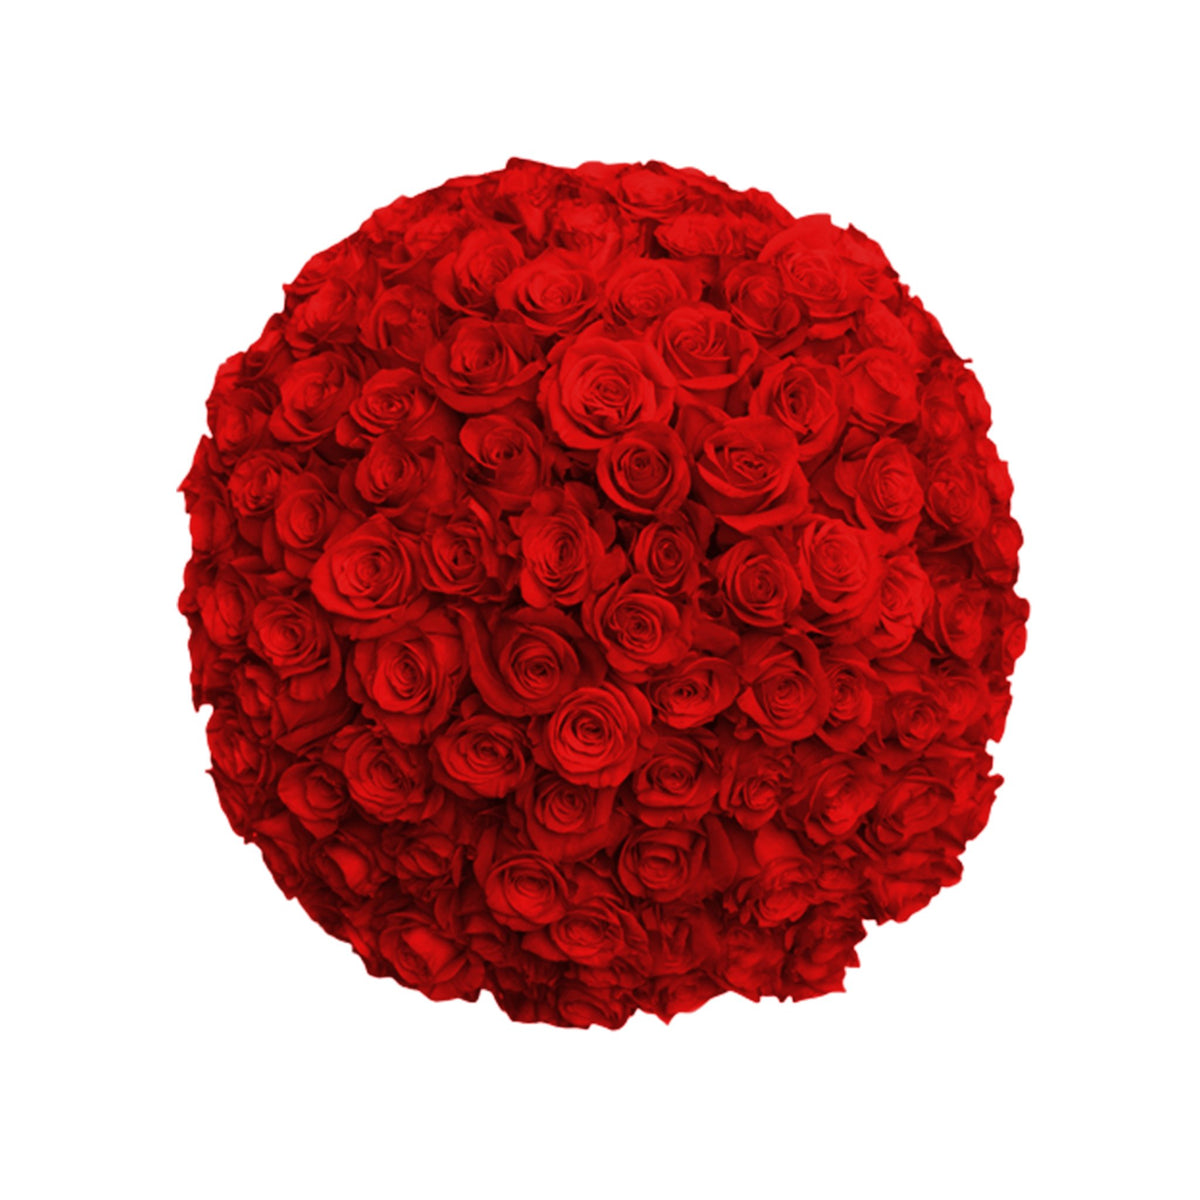 Fresh Roses in a Vase | 100 Red Roses - Roses